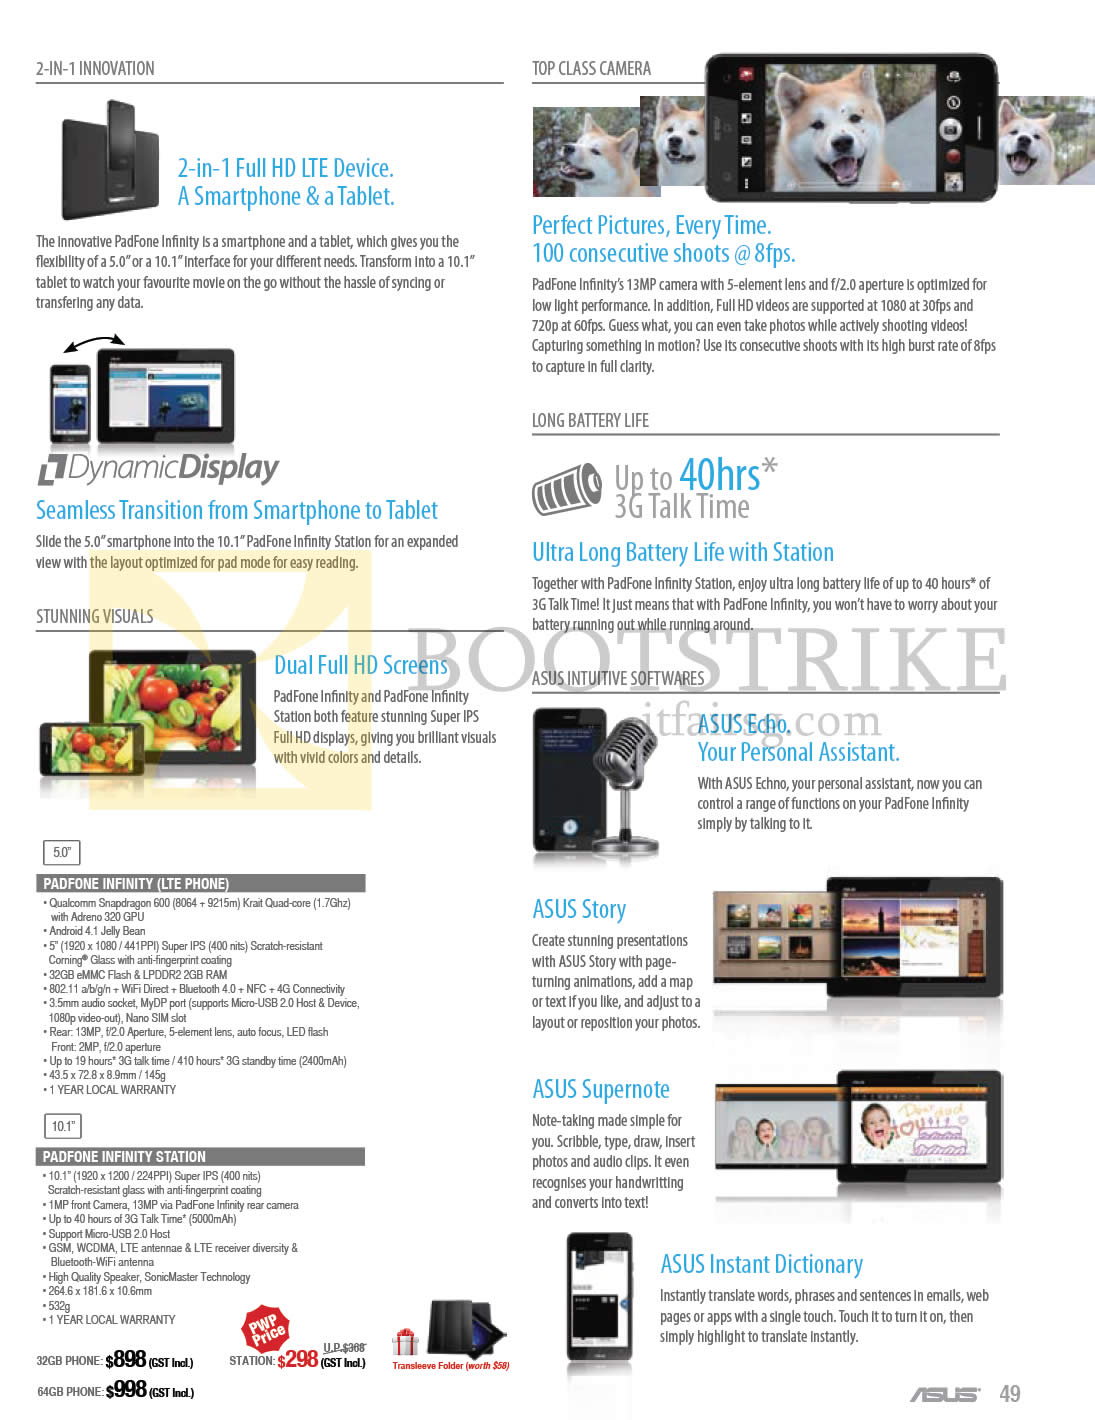 COMEX 2013 price list image brochure of ASUS Tablet Smartphone PadFone Infinity Features, PadFone Infinity Station